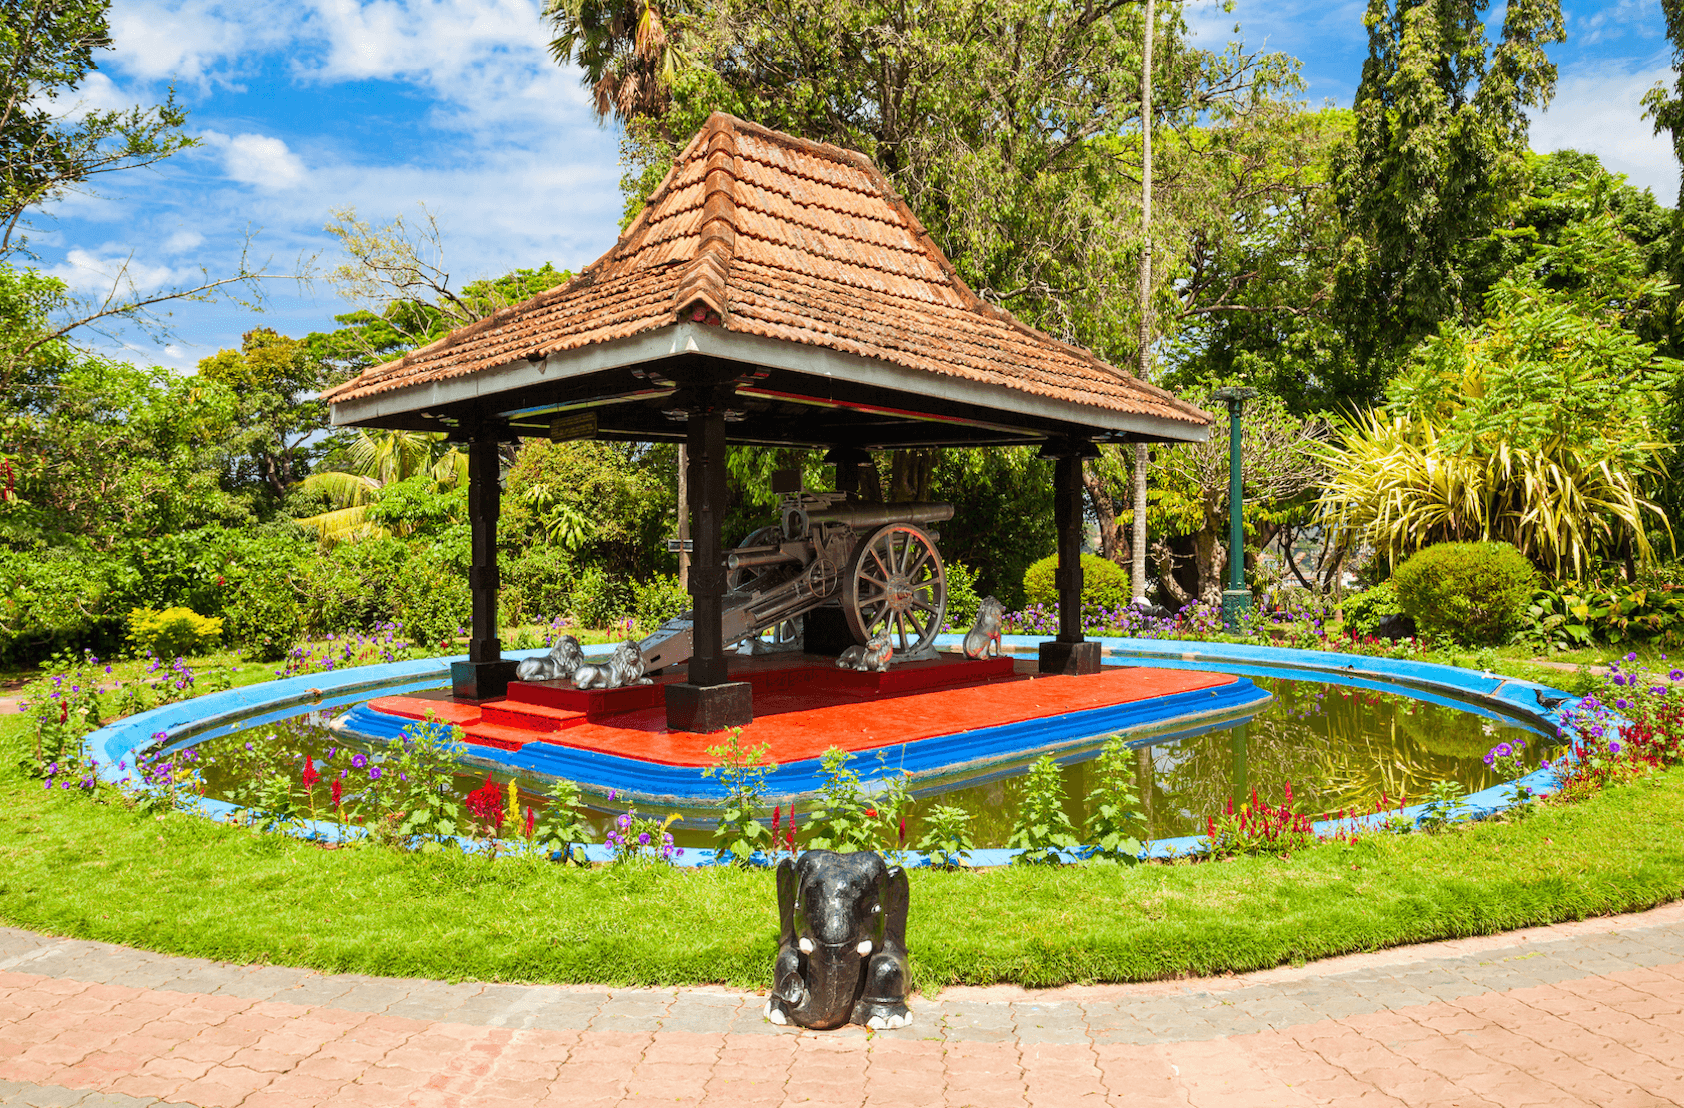 View of a gazebo in a small pond with a metal canon on a carriage under it in Wales Park (Royal Palace Park), one of the best places to visit in Kandy.